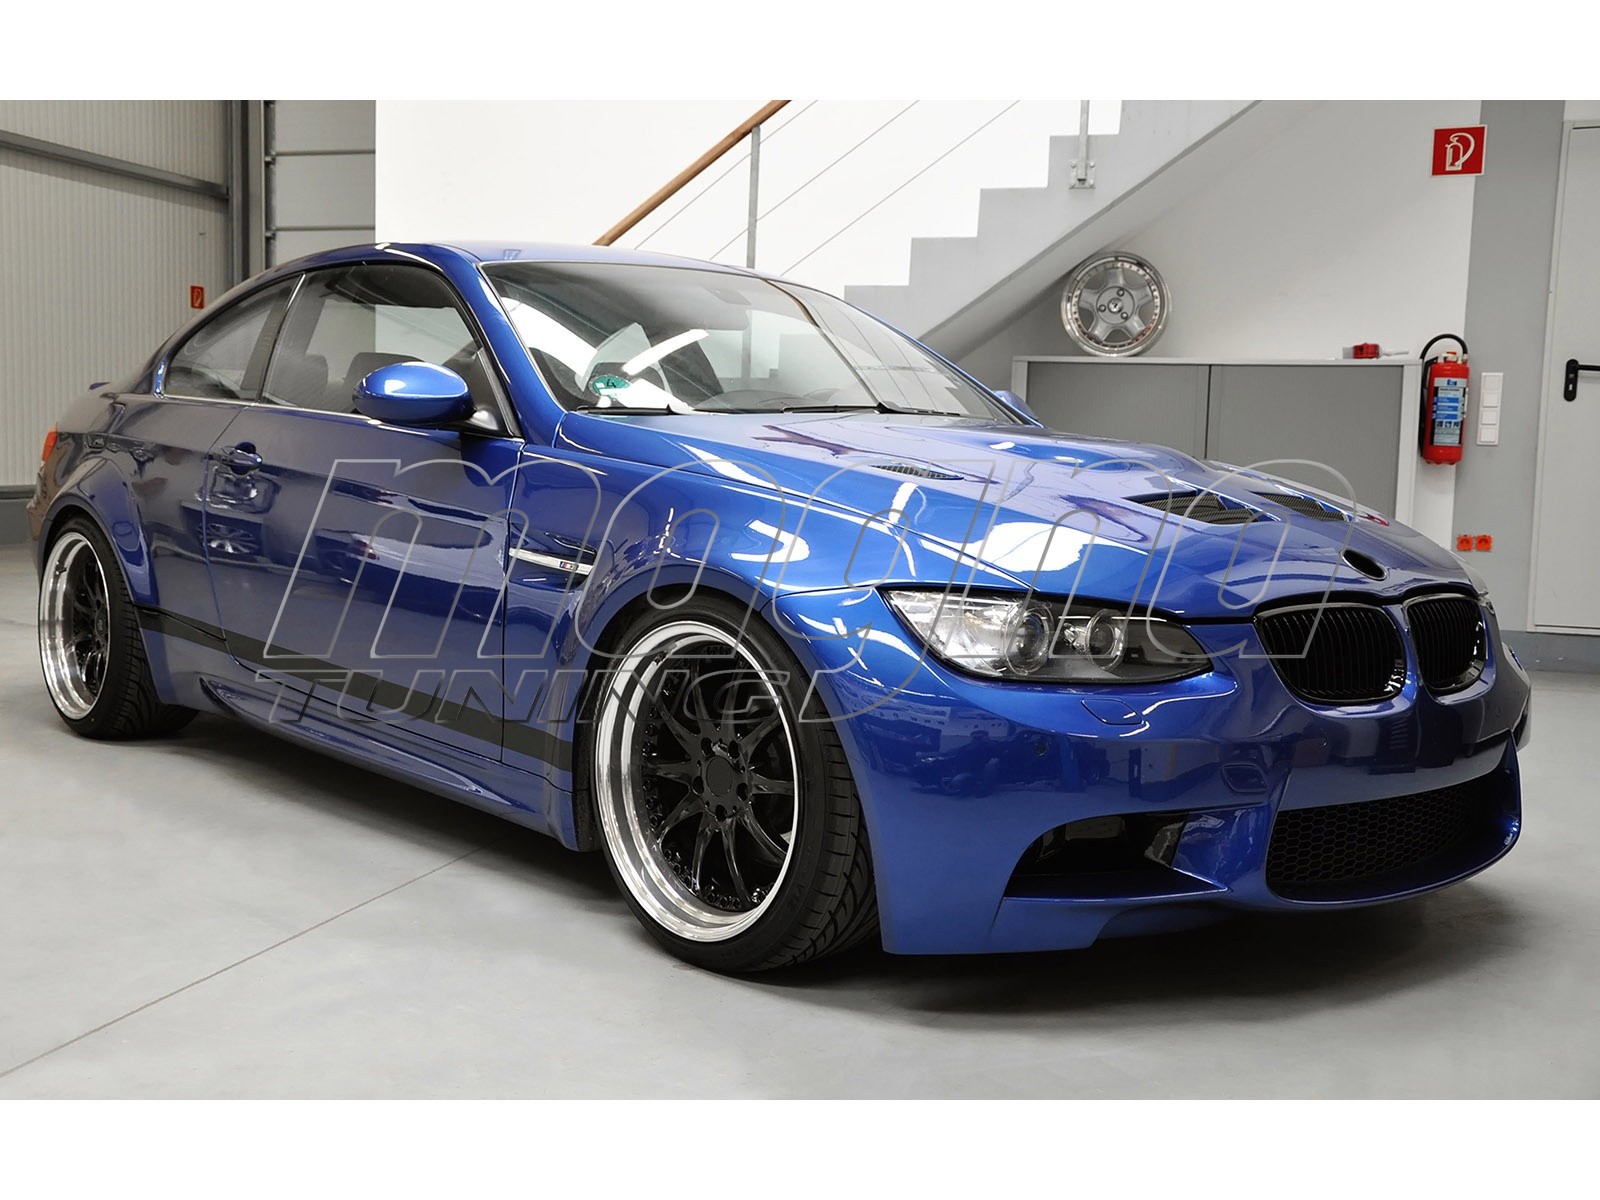 BMW E92 E93 bodykit m3 style coupe for BMW 3 Series Coupe bodykit